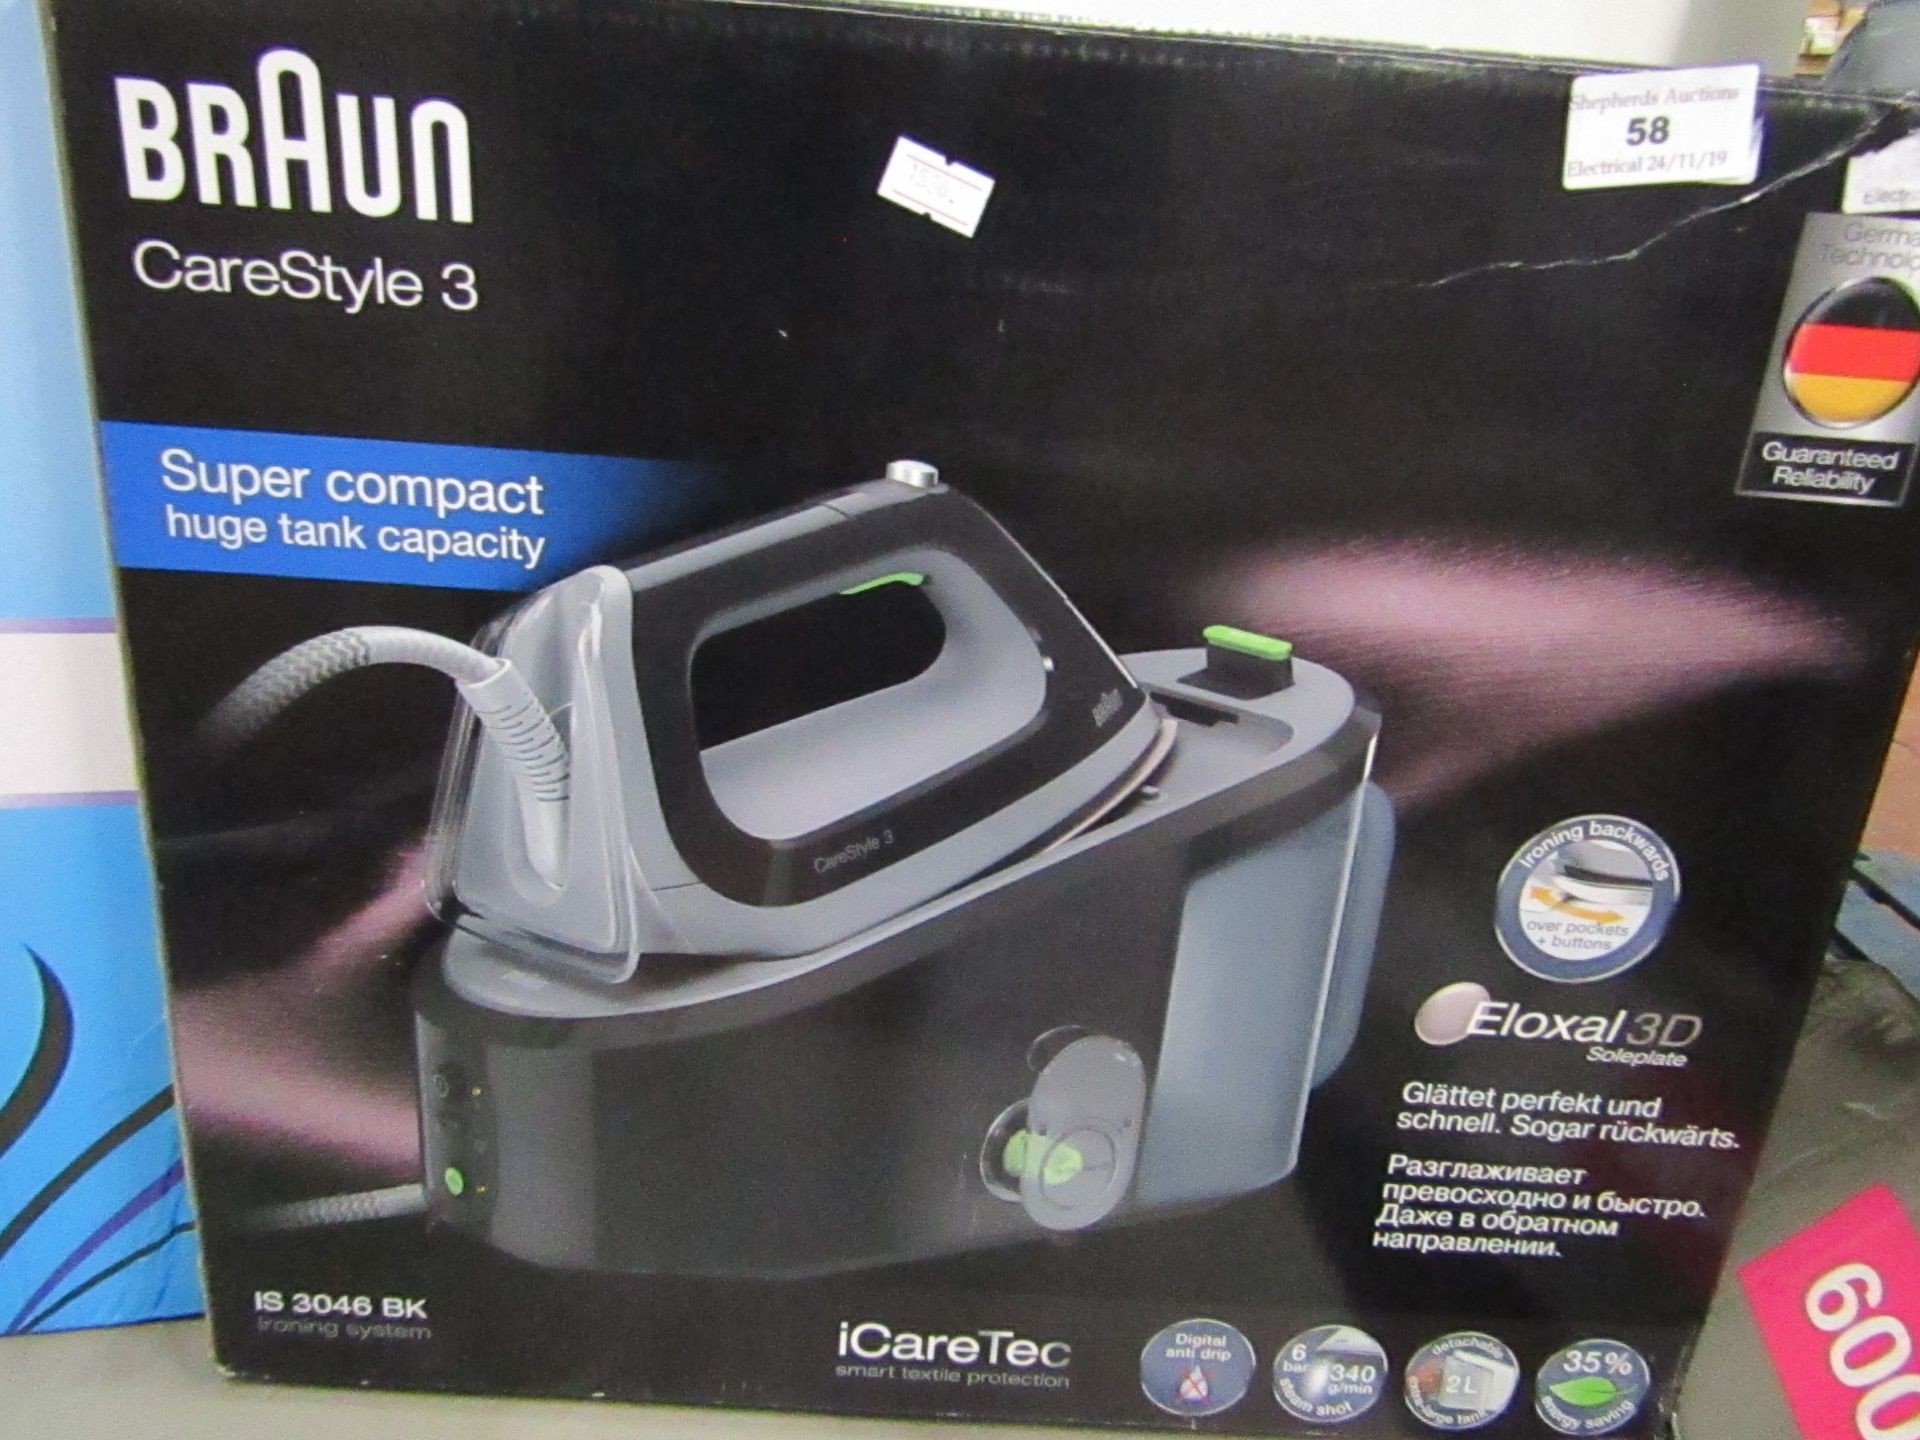 Braun Care Style 3 super compact iCare Tec steam generator iron, powers on and boxed.